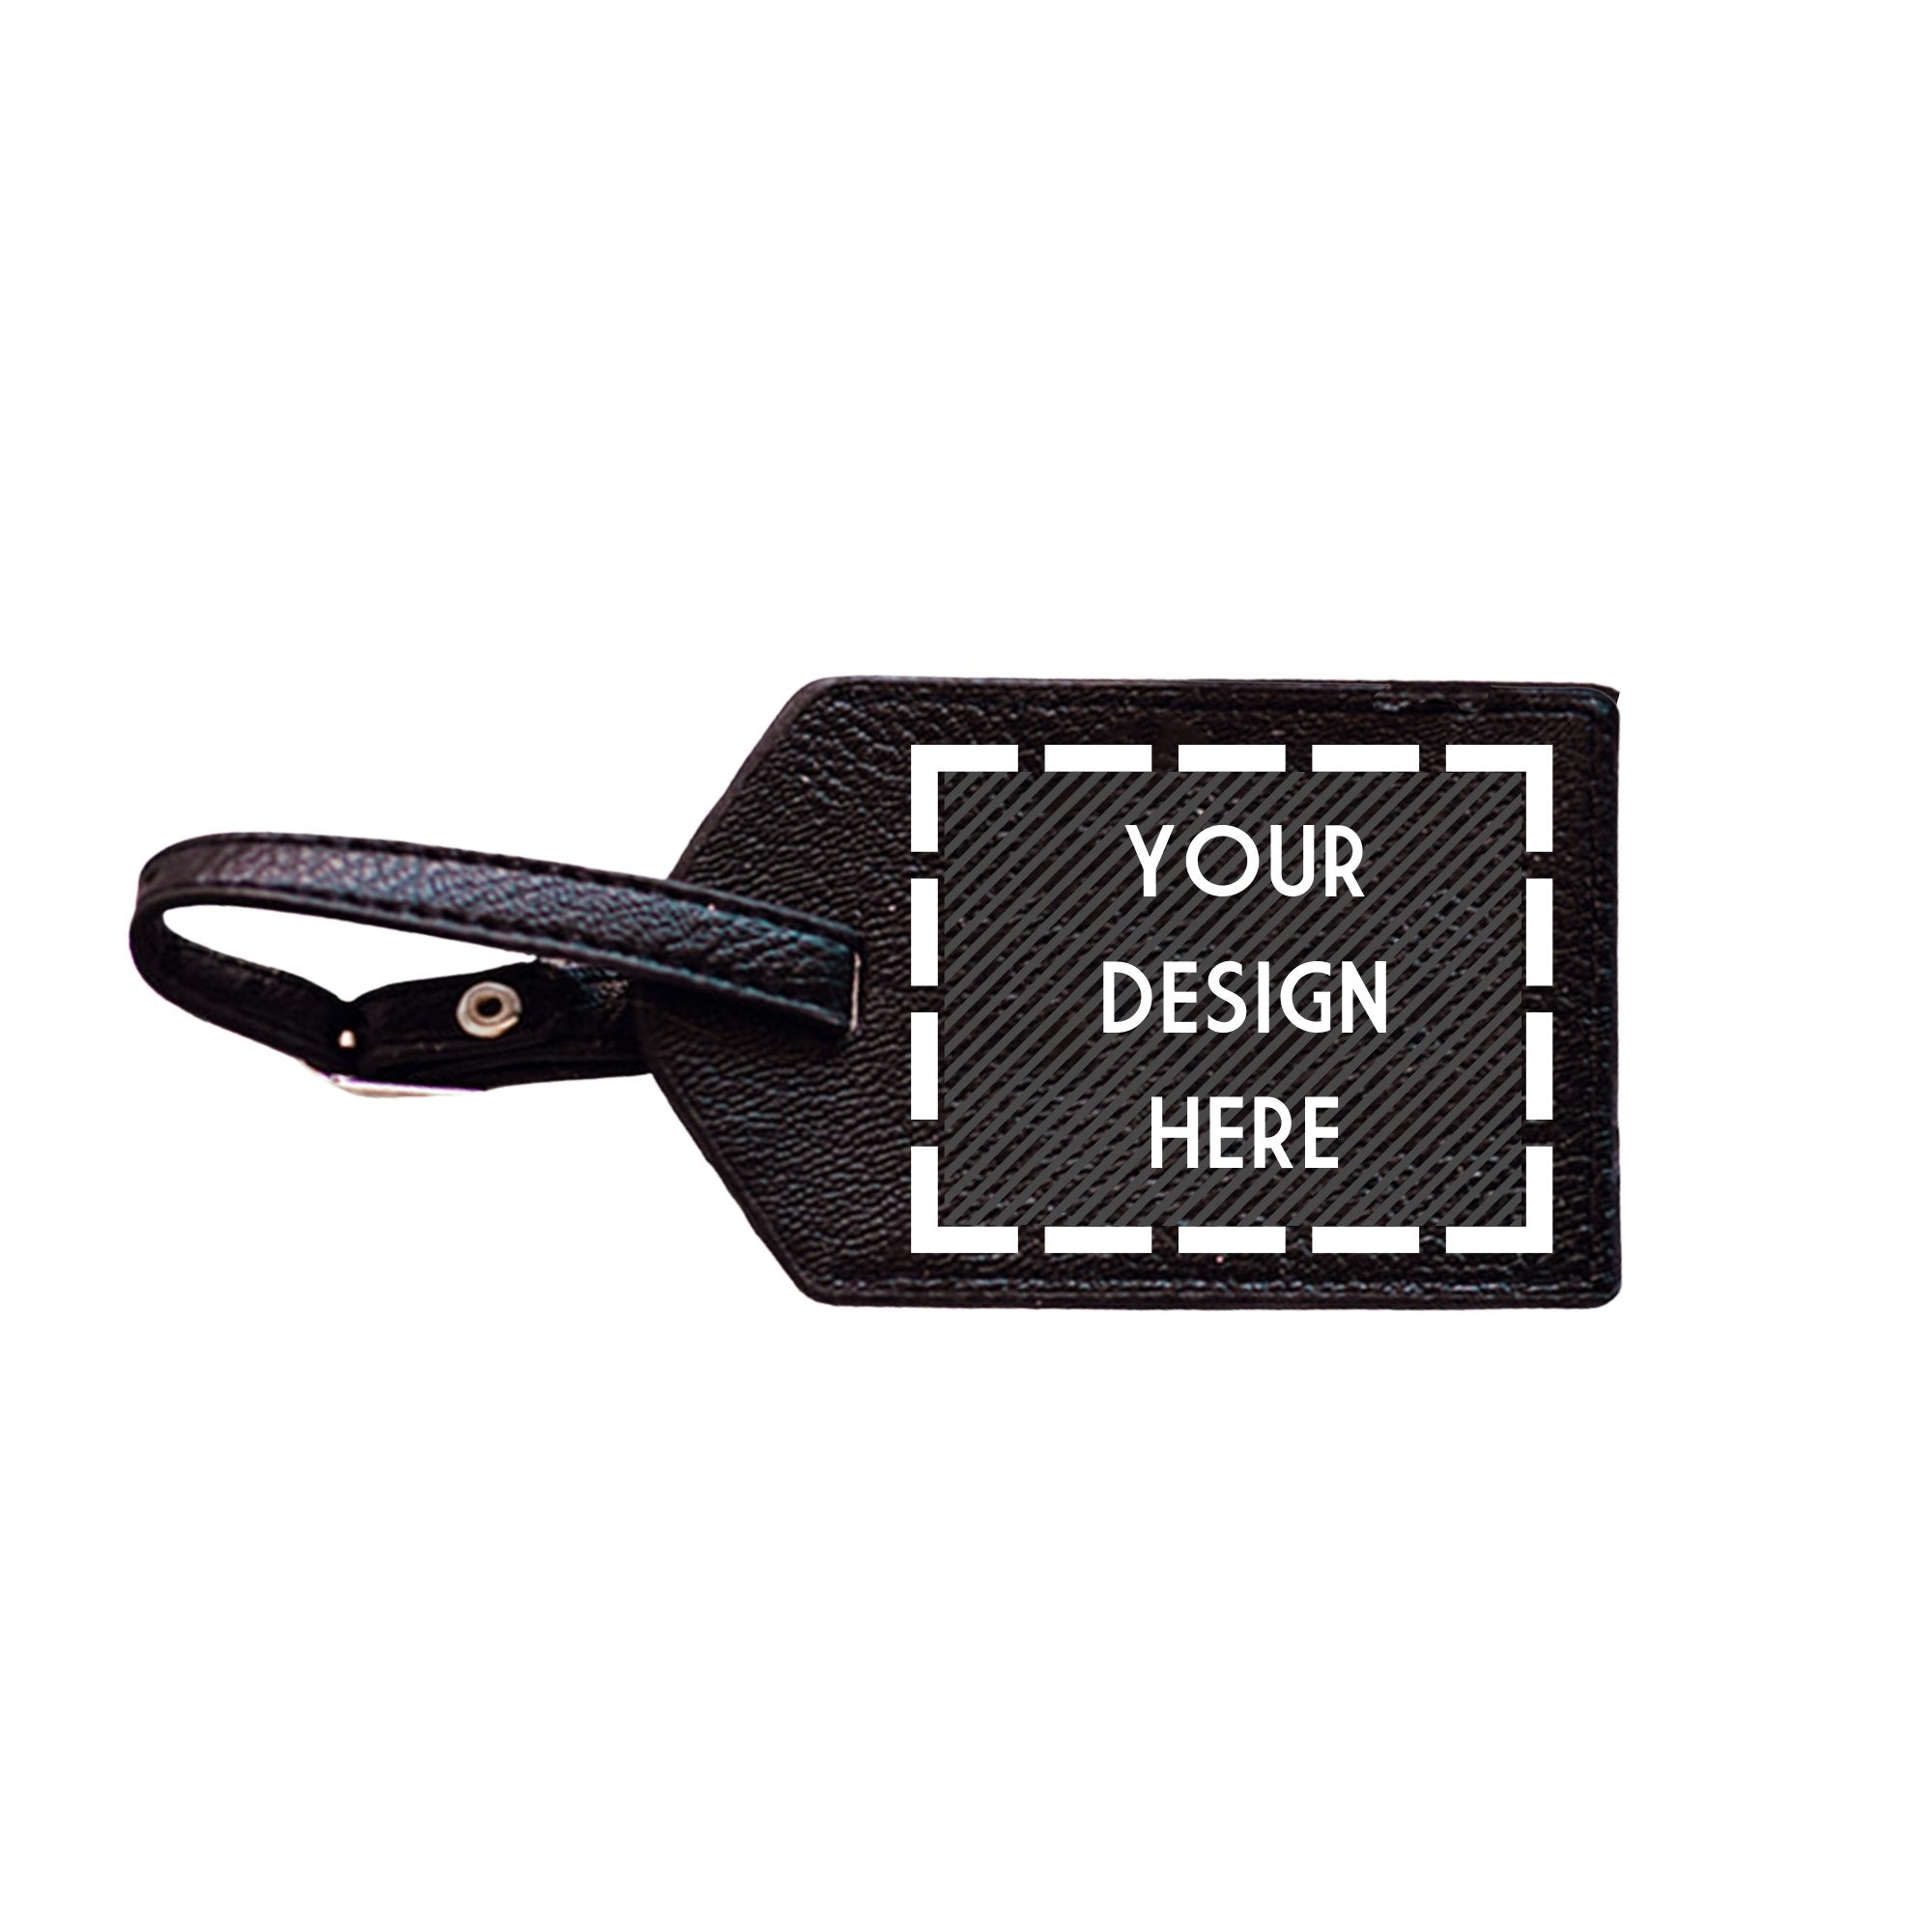 A black luggage tag with a customizable area on the front